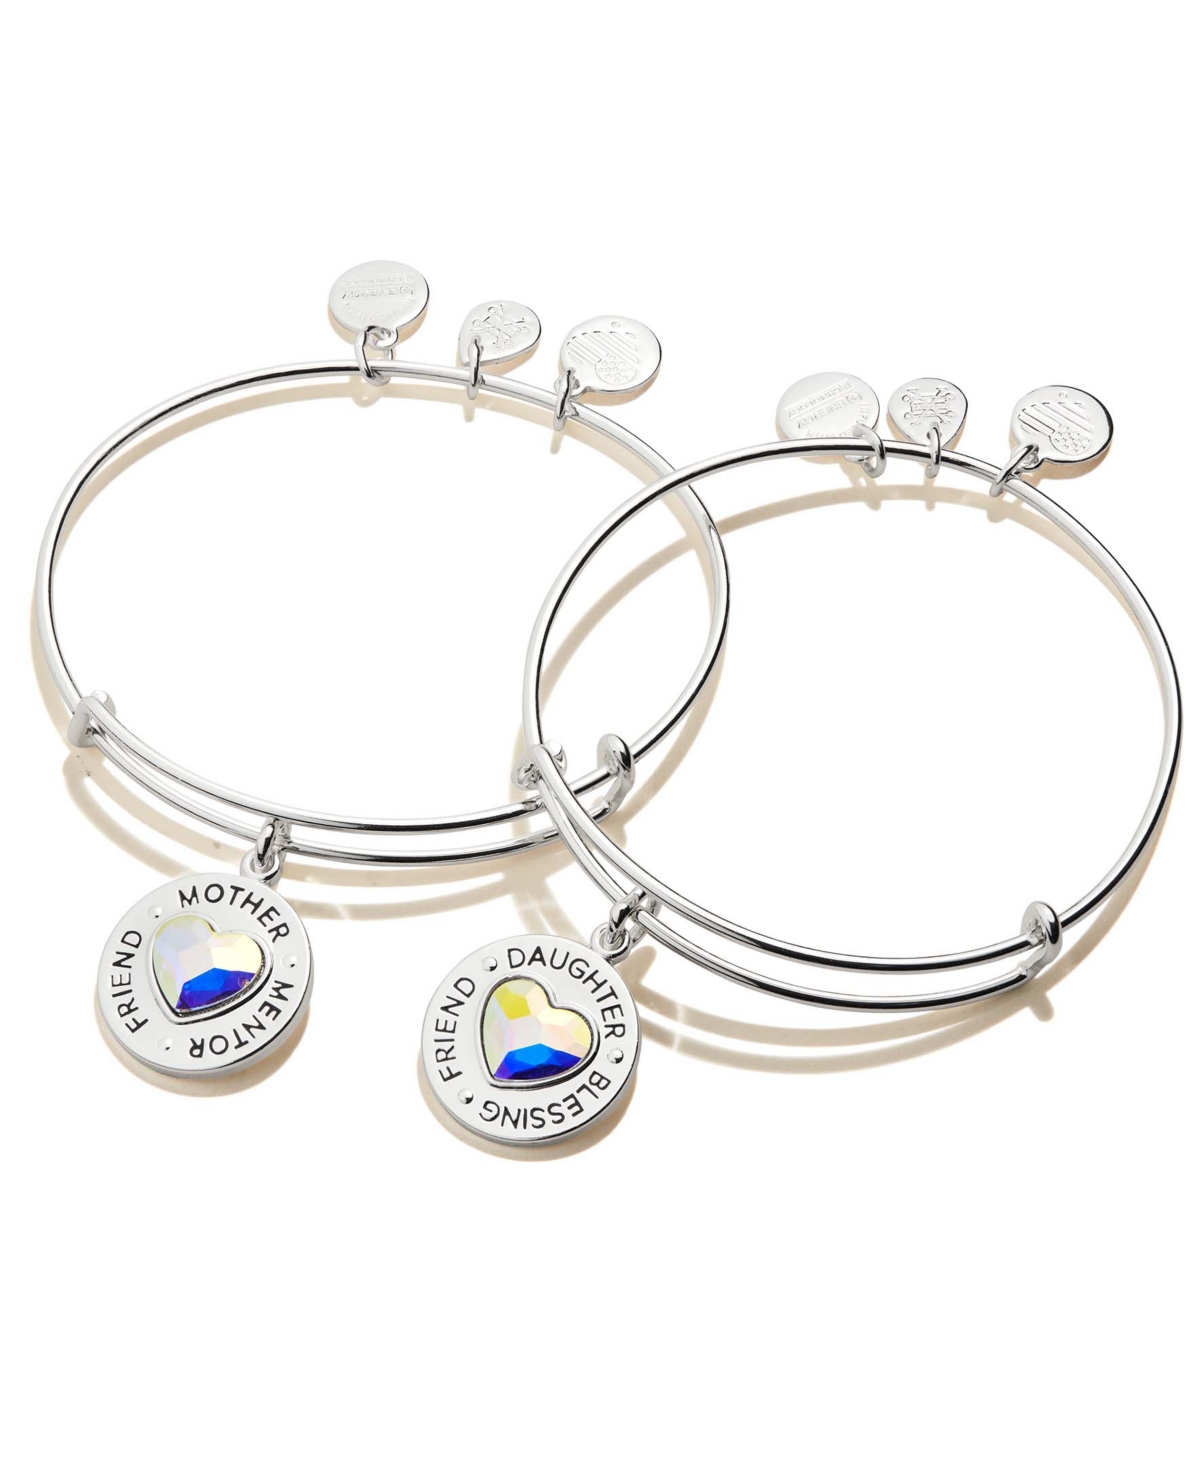 Alex And Ani Mother Daughter Charm Bangles Set of 2